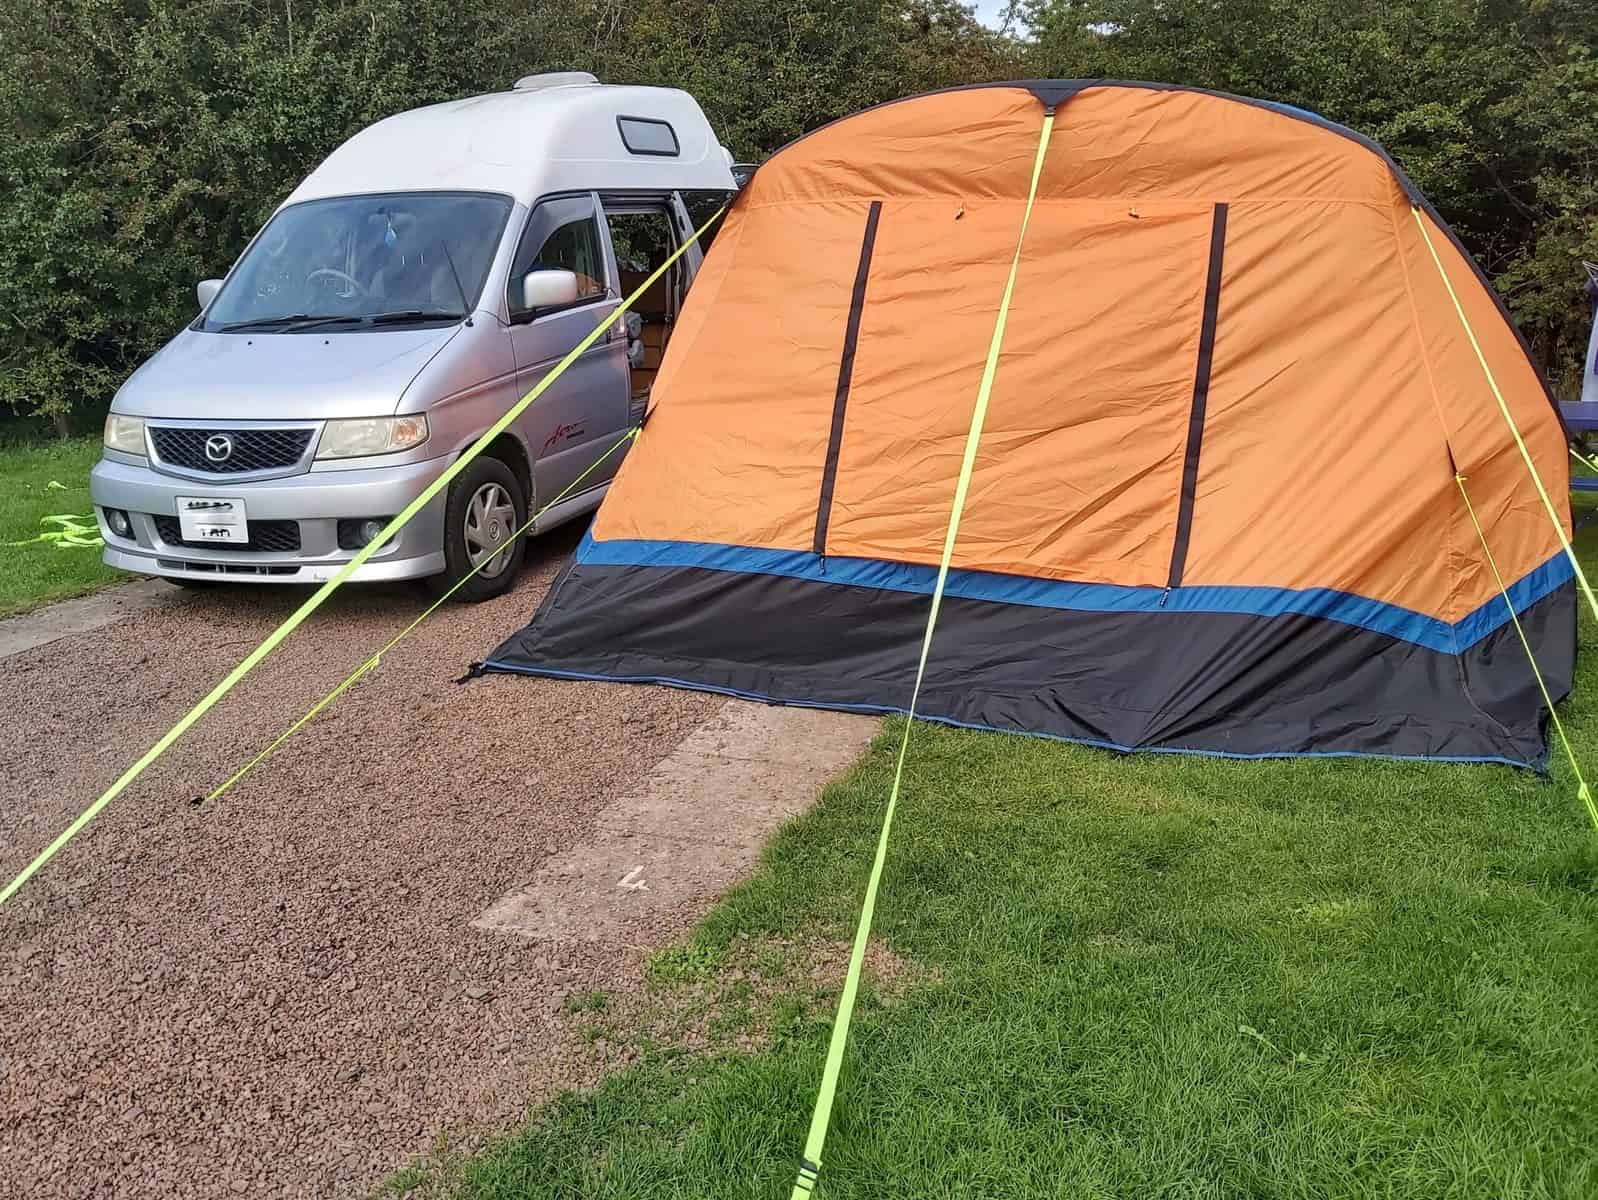 Olpro Cocoon Breeze inflatable drive away campervan awning review [AD]